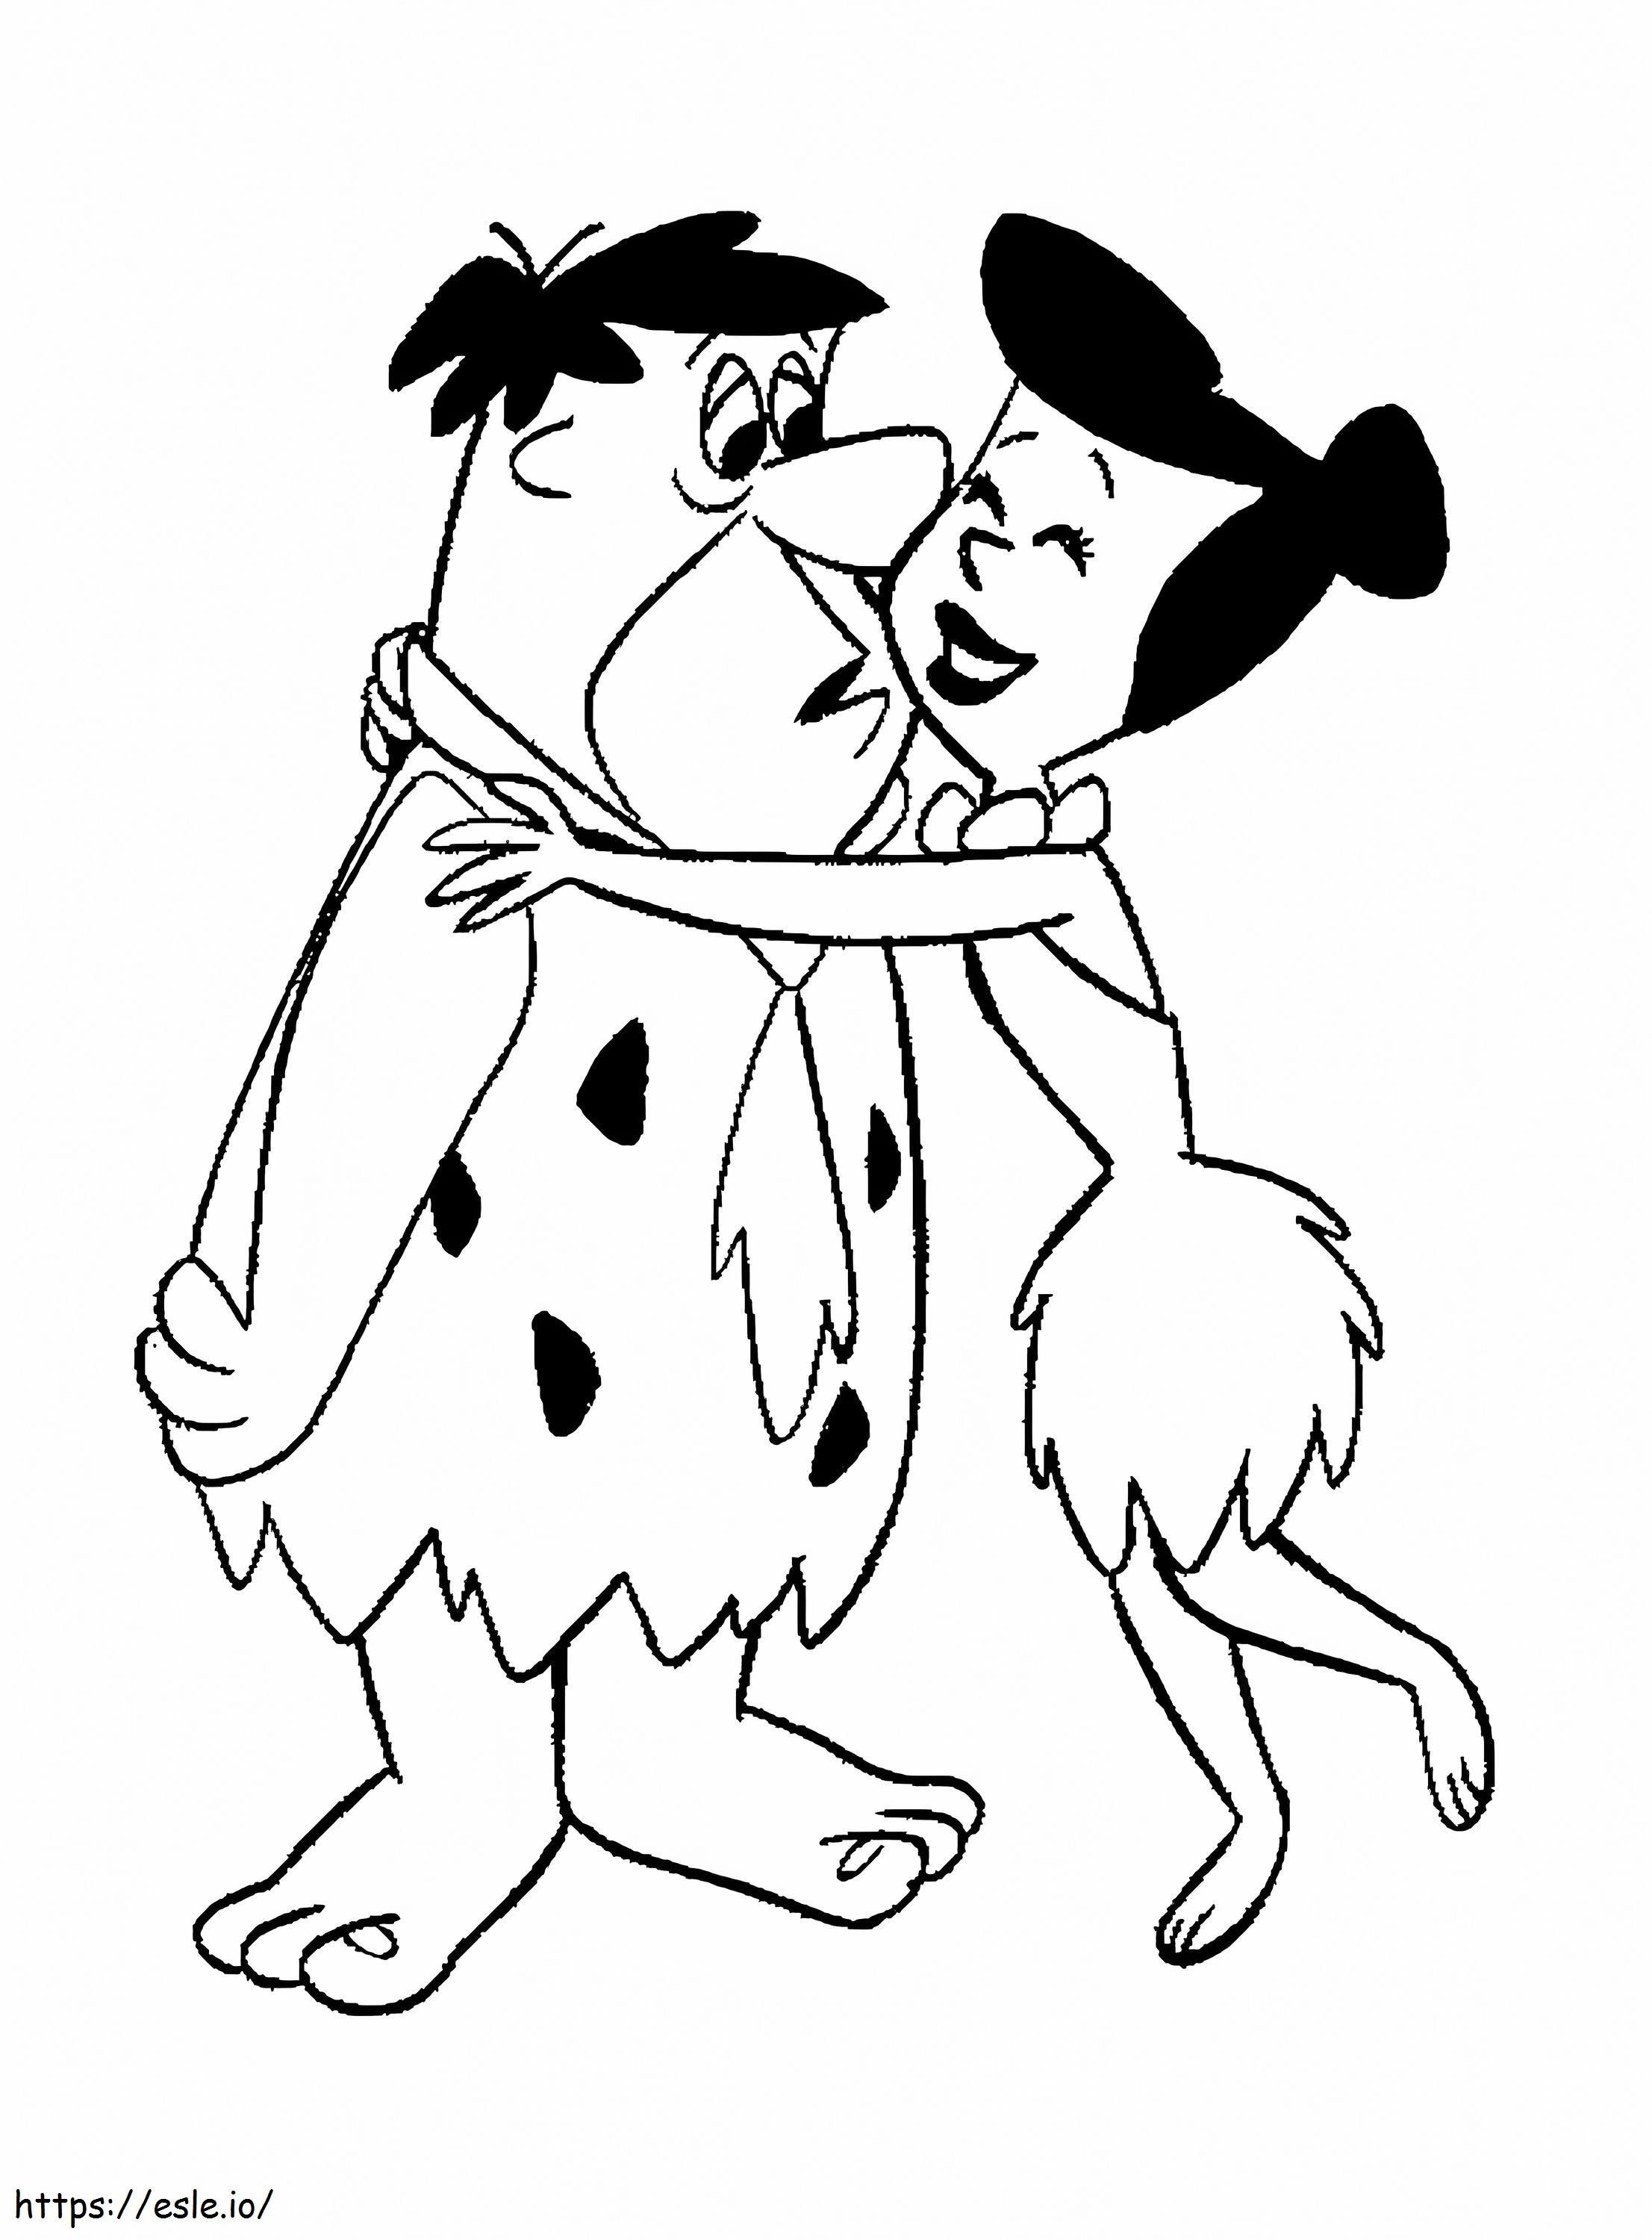 Fred And Wilma coloring page